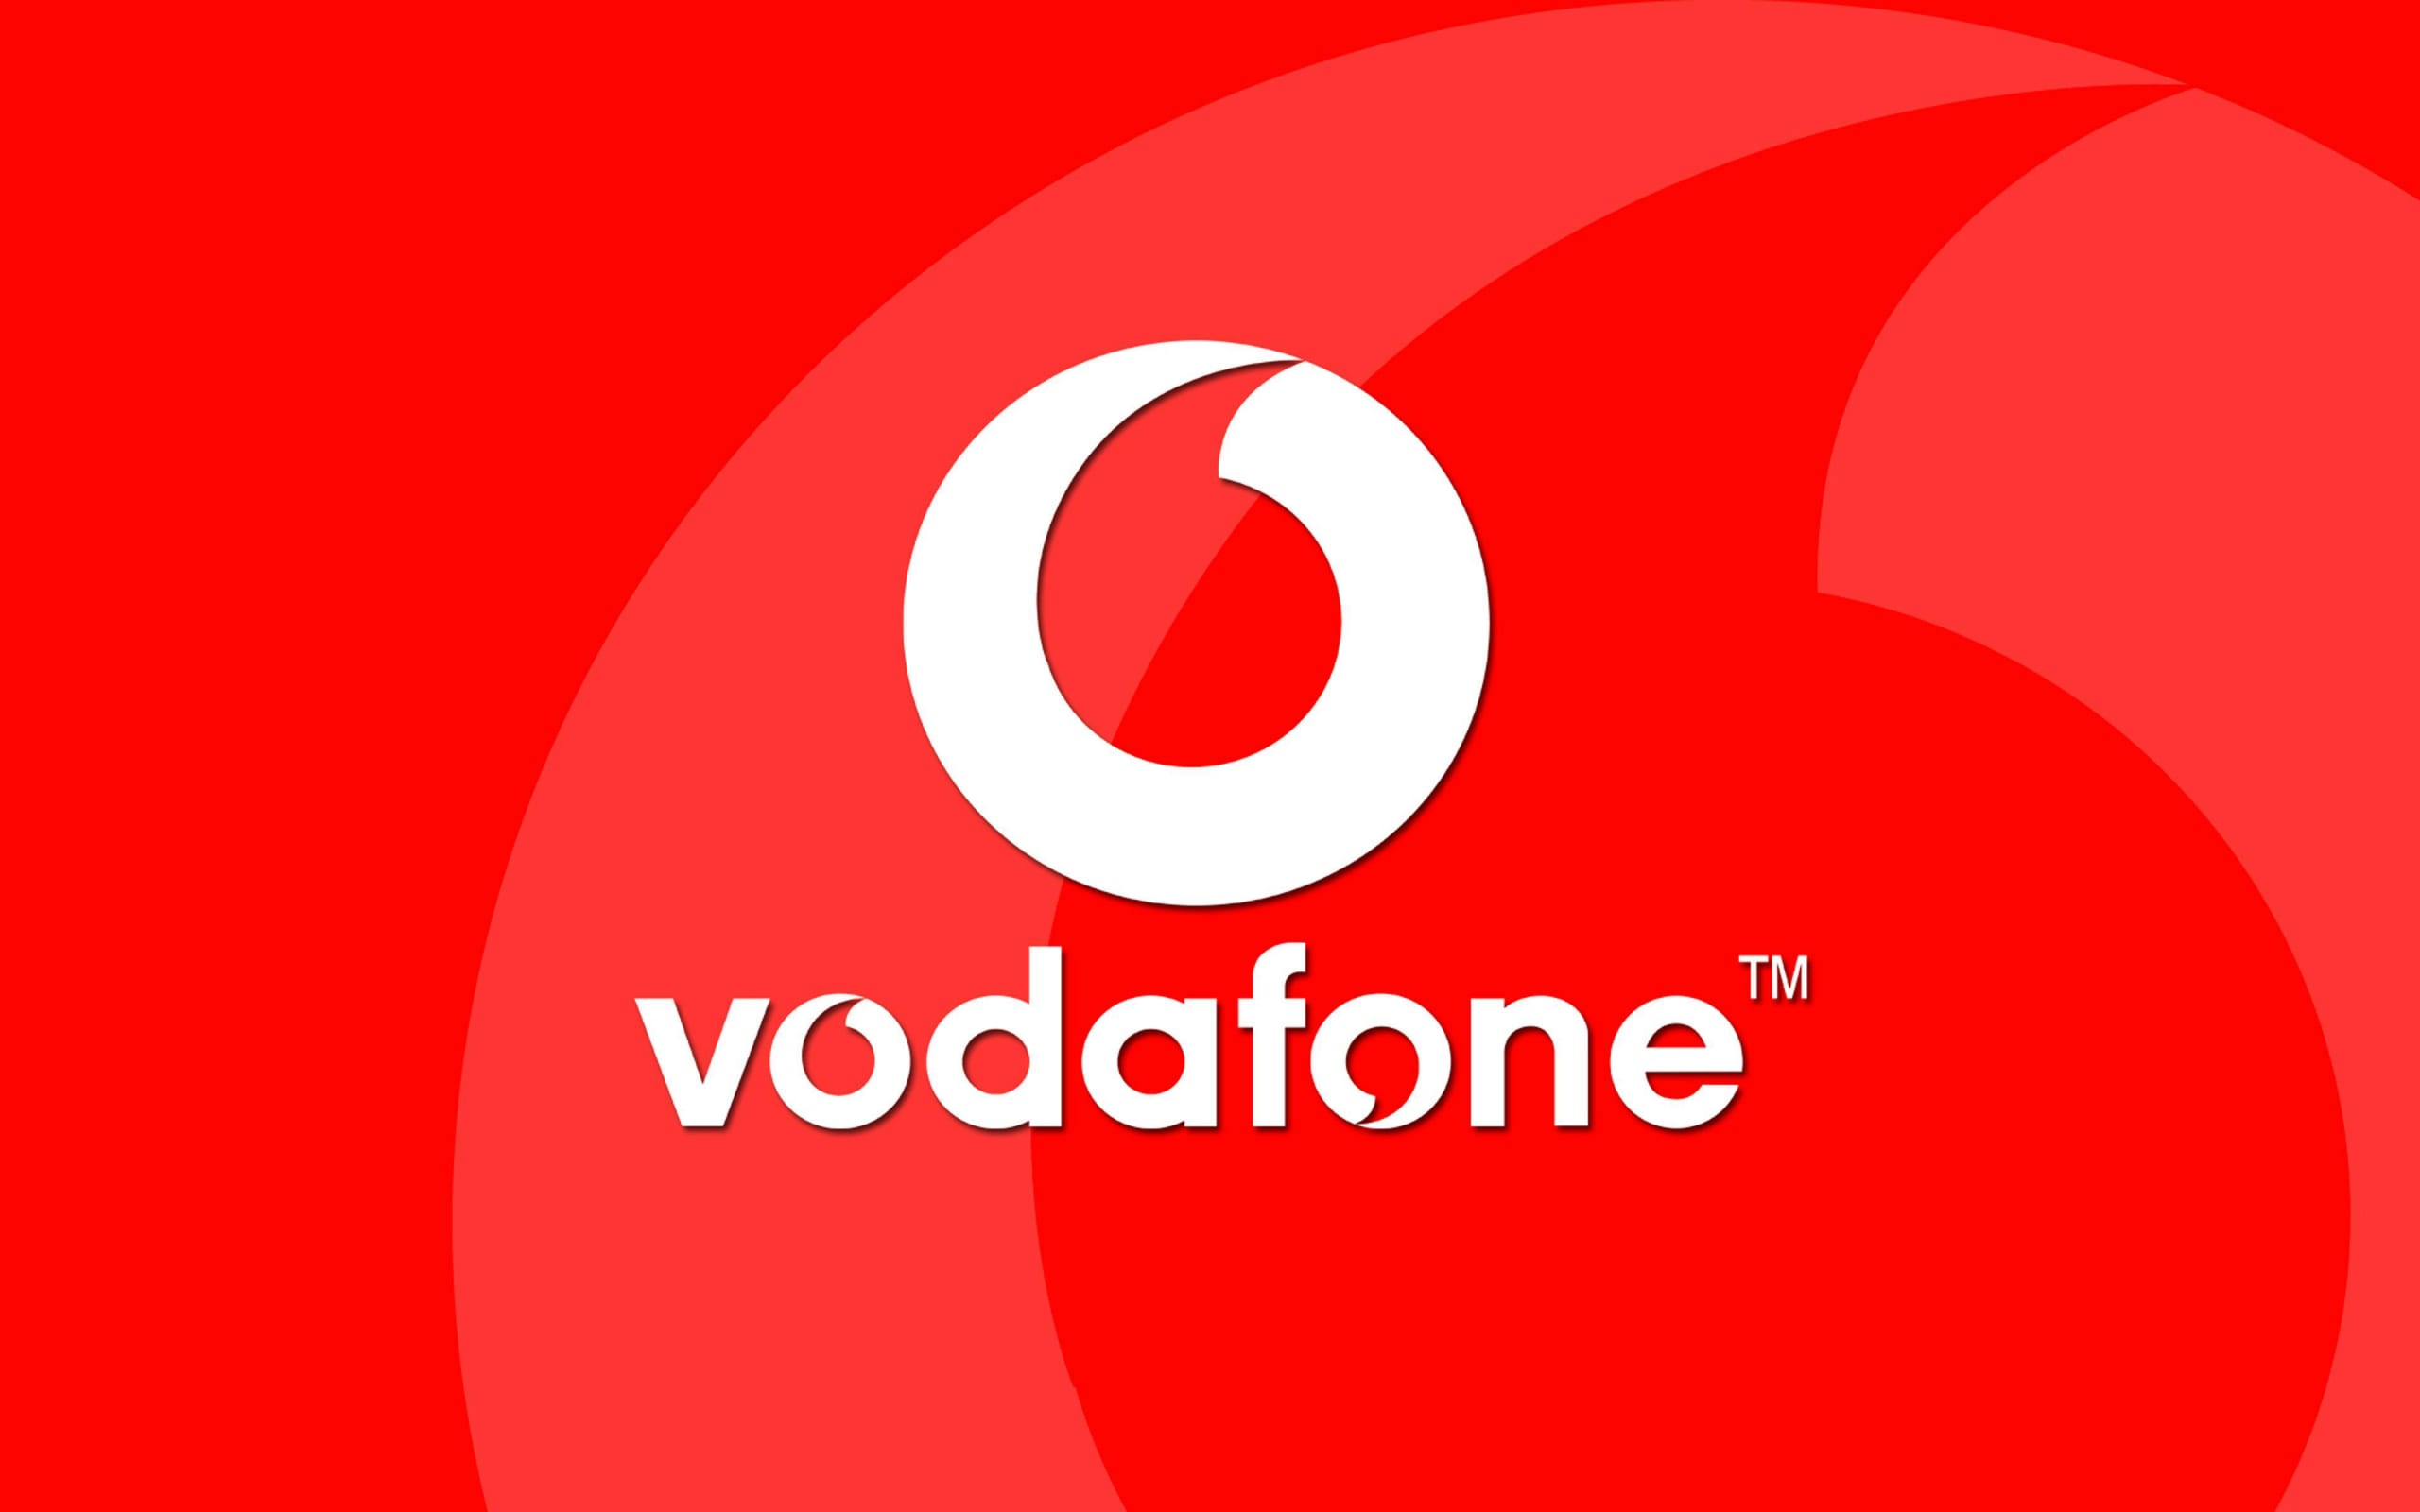 Vodafone apologized for yesterday's insults: it offers unlimited gigabytes for 1 month